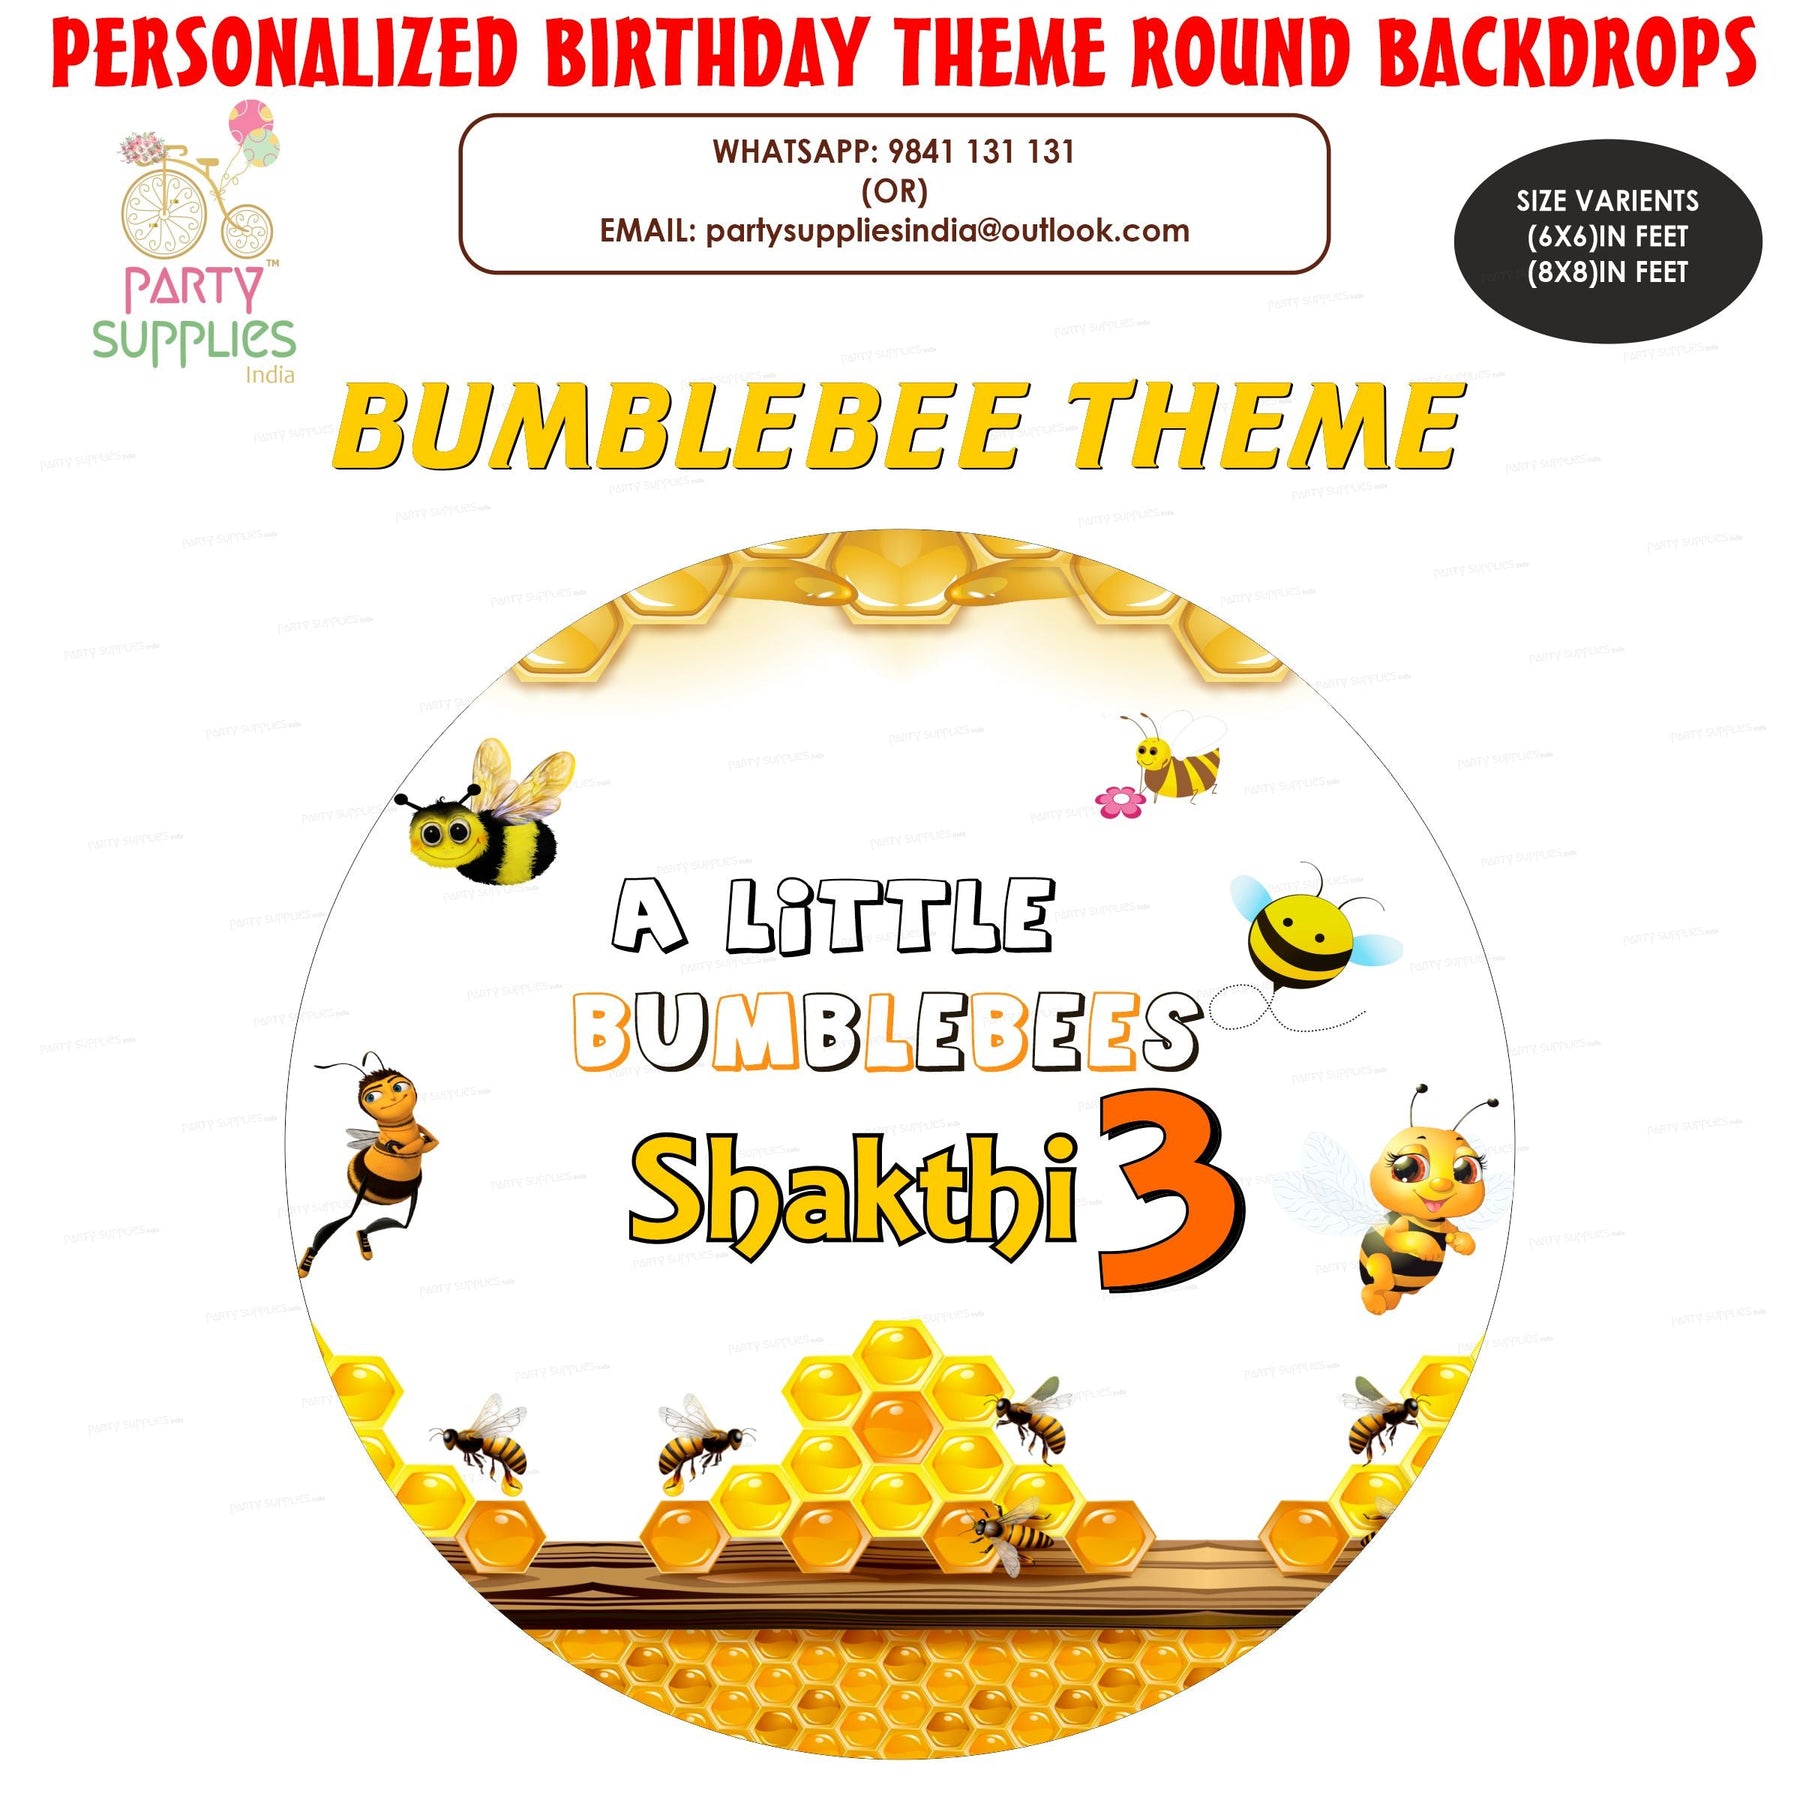 PSI Bumble Bee Theme Personalized   Round Backdrop